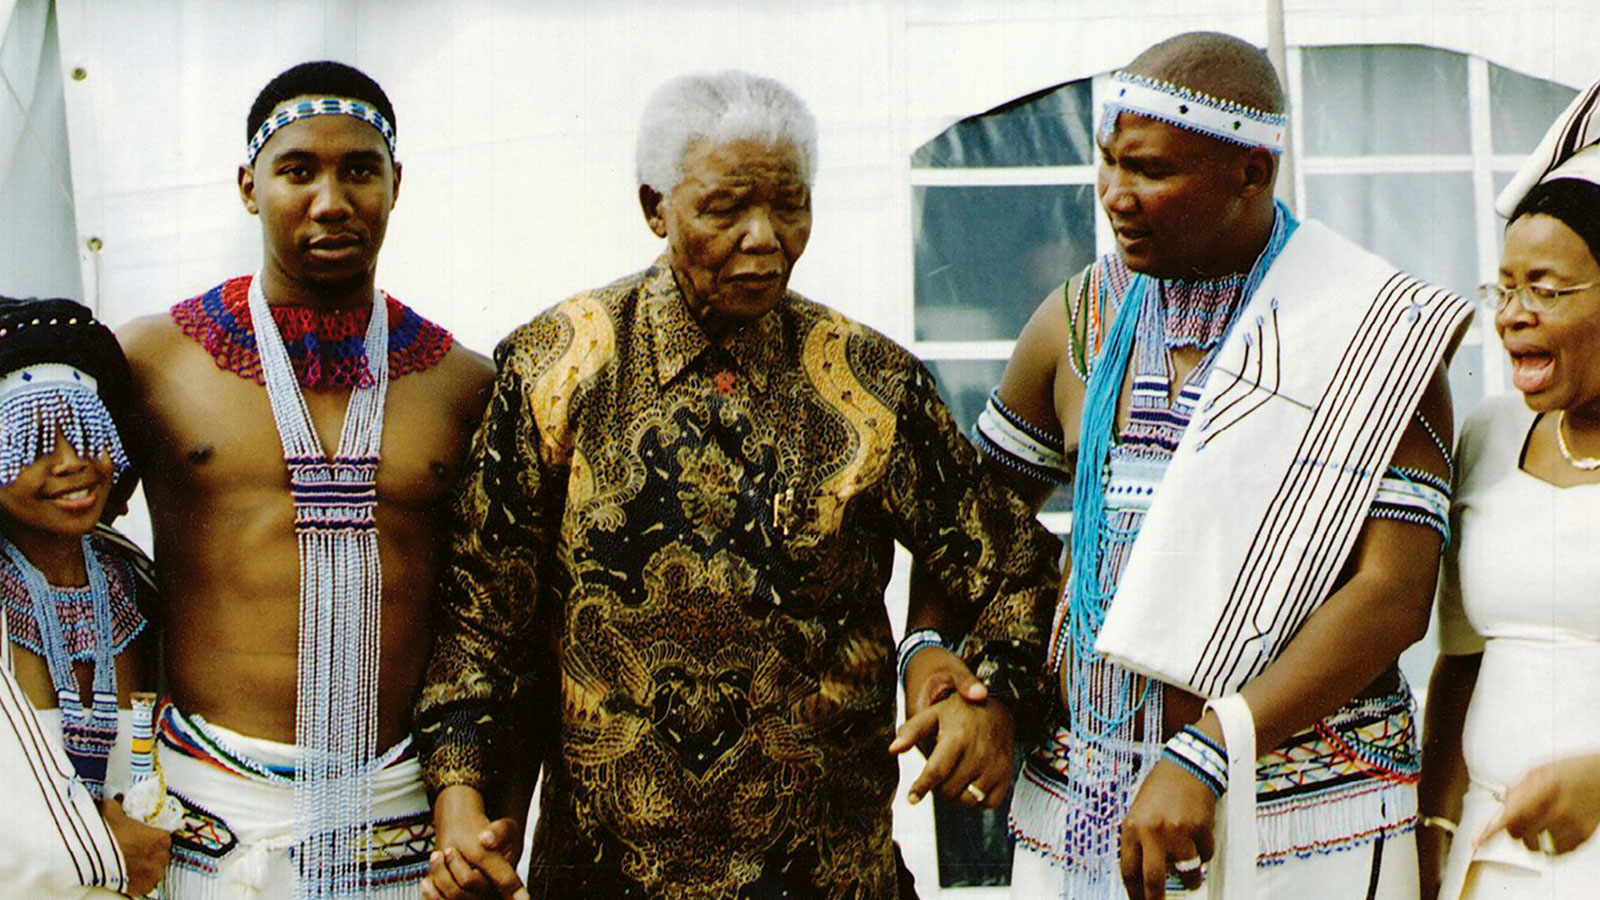 Mandela in his later years attends a traditional wedding alongside grandsons Ndaba and Mandla and wife Graça in Qunu, his childhood village.